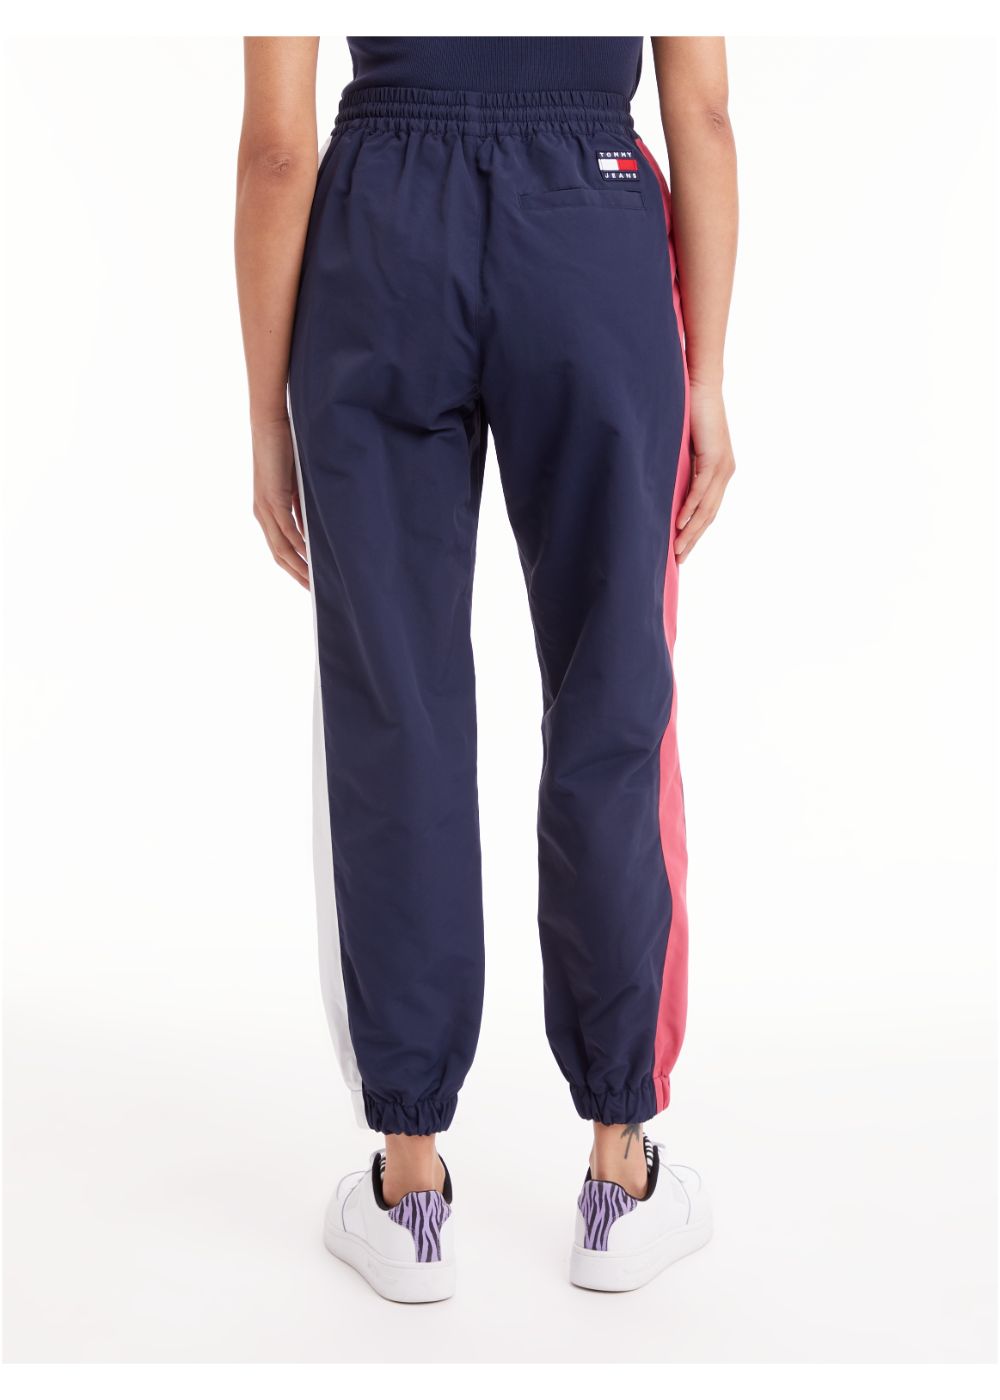 Tommy Hilfiger - houndstooth - - sweatpants women dstore tapered online